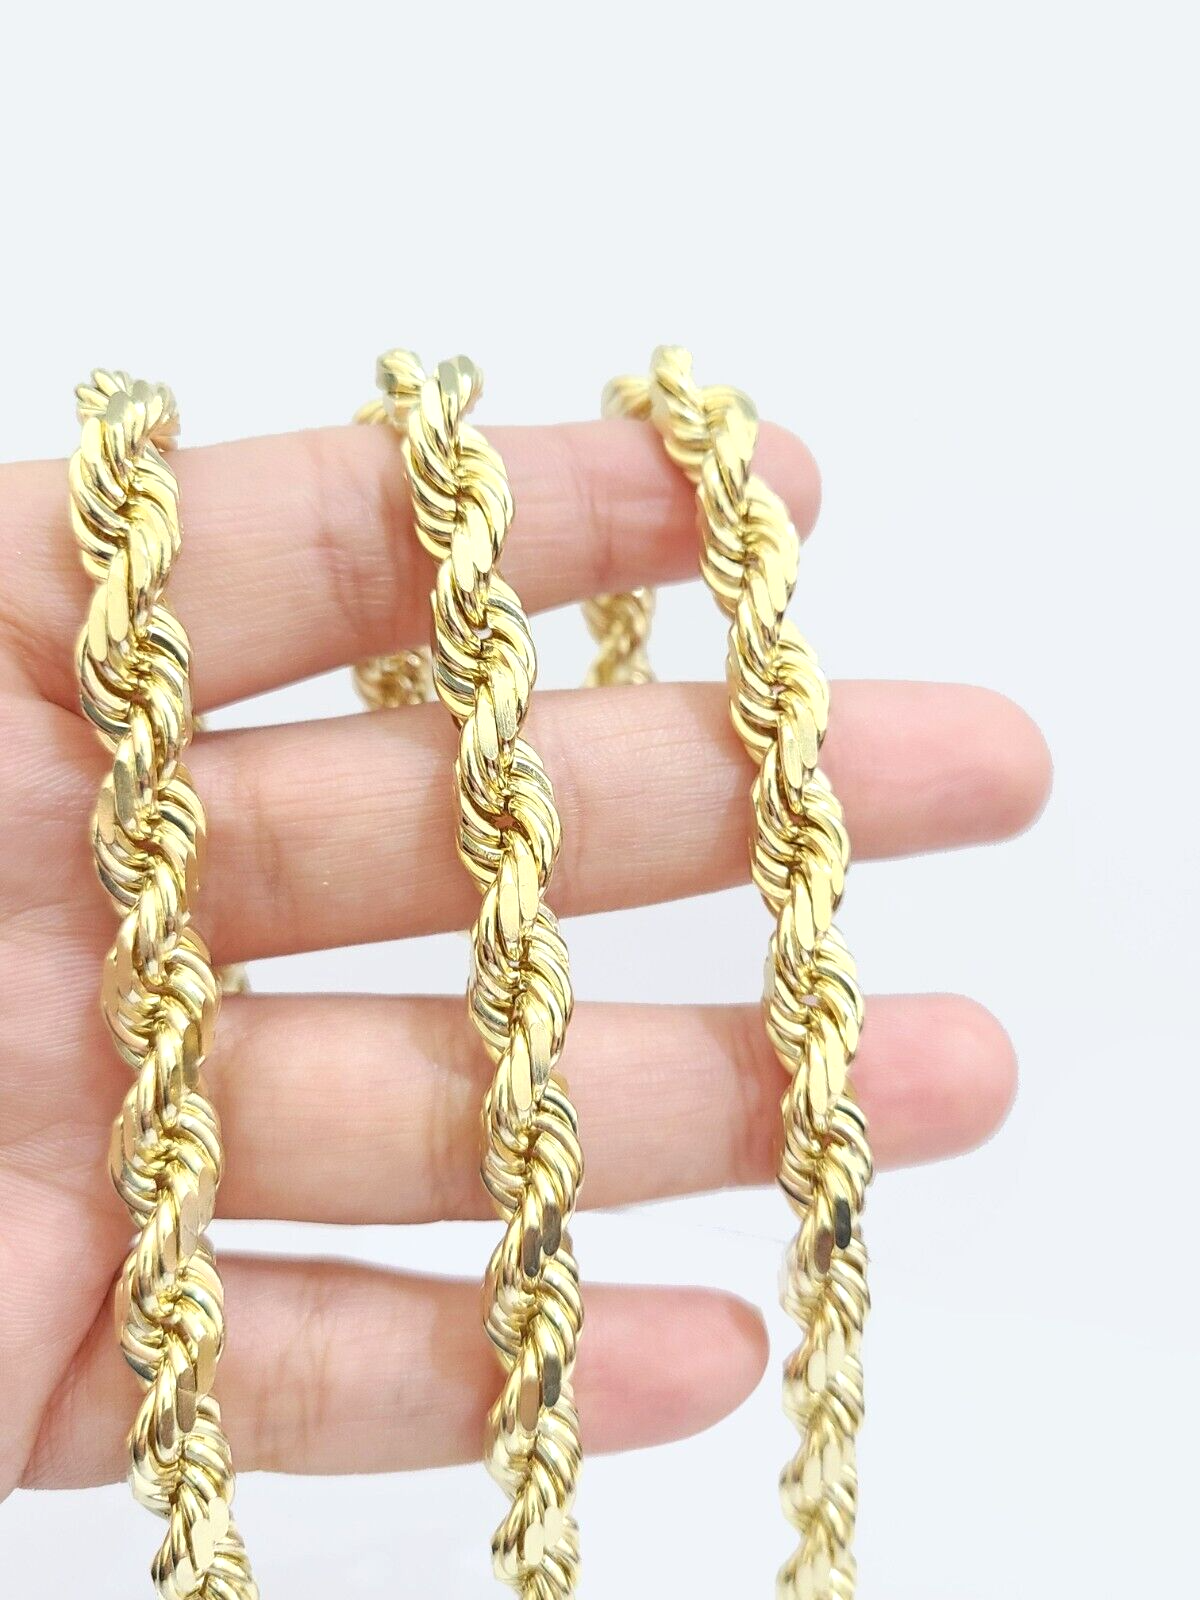 14K Real Solid Yellow Gold Necklace Rope Chain 7mm 24 inch 14kt Chain unisex